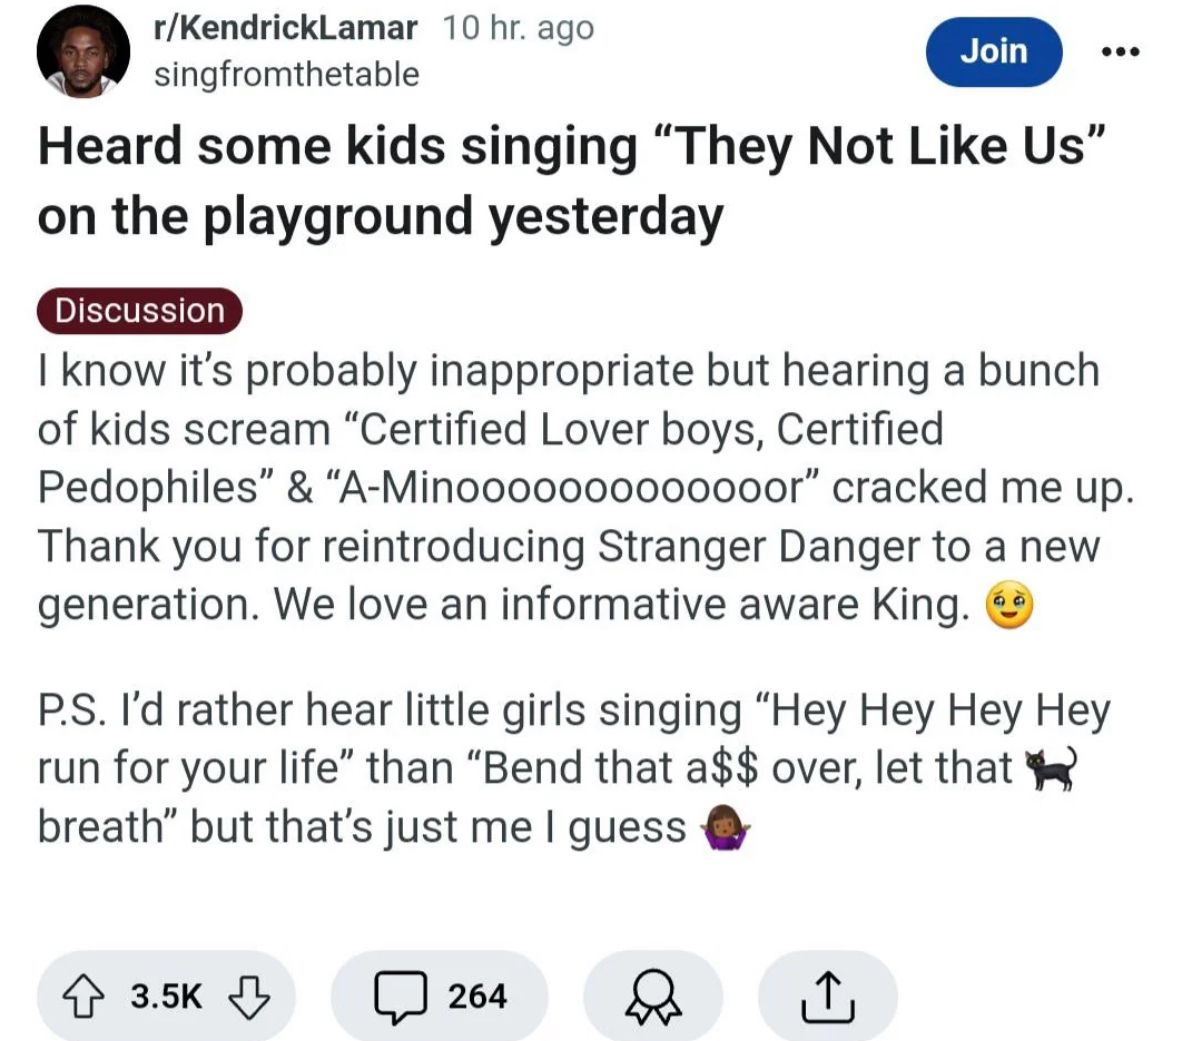 r/KendrickLamar 10 hr. ago
singfromthetable
Join
Heard some kids singing "They Not Like Us"
on the playground yesterday
Discussion
I know it's probably inappropriate but hearing a bunch
of kids scream "Certified Lover boys, Certified
Pedophiles" & "A-Minooooooooooooor" cracked me up.
Thank you for reintroducing Stranger Danger to a new
generation. We love an informative aware King. →
P.S. I'd rather hear little girls singing "Hey Hey Hey Hey
run for your life" than "Bend that a$$ over, let that ☑
breath" but that's just me I guess
3.5K
264
Д
↑